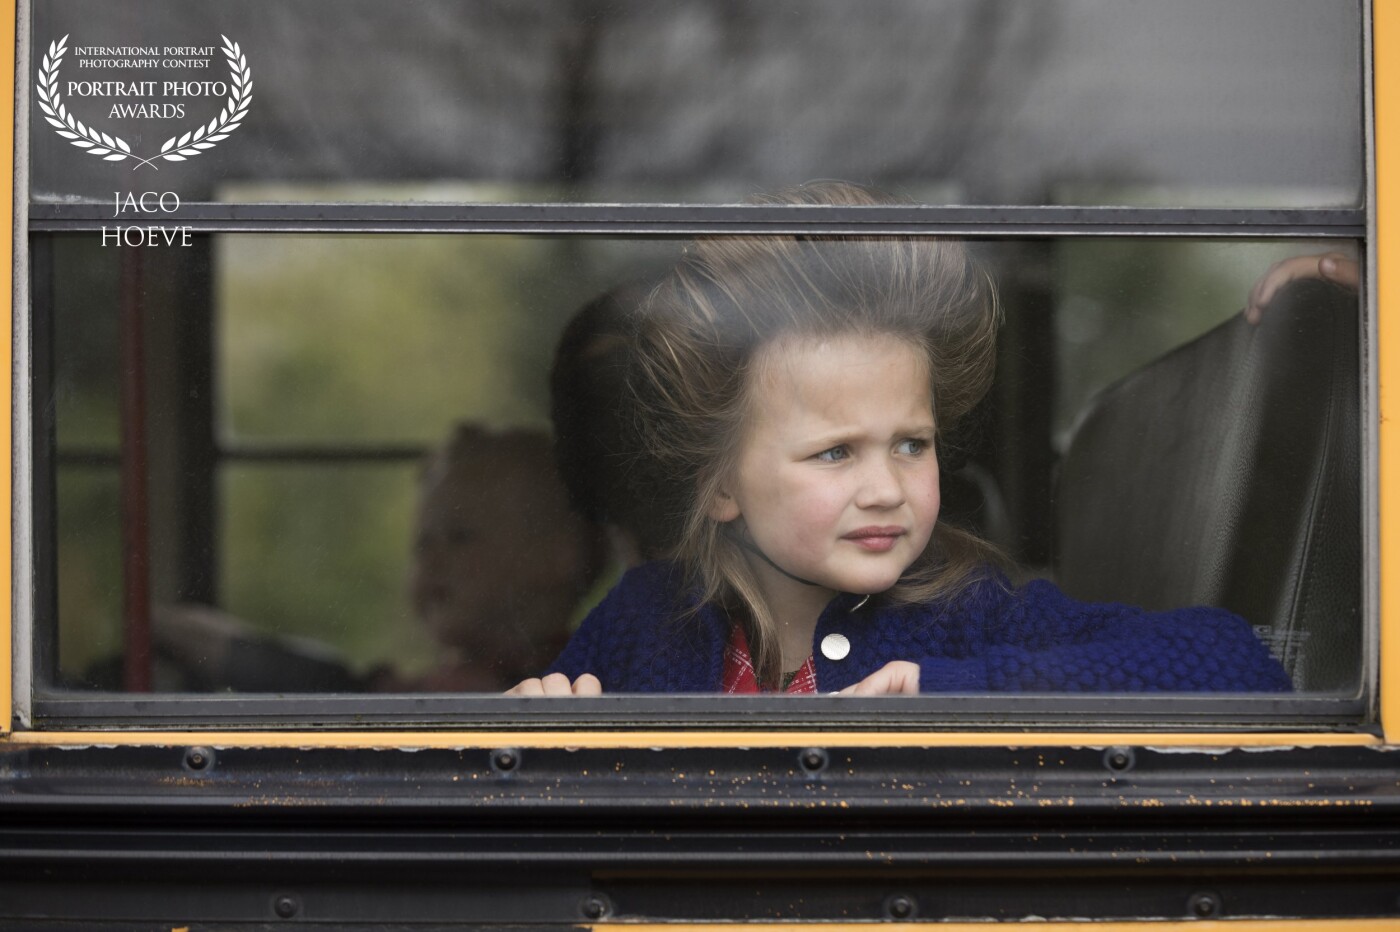 For the wedding of their teacher, the schoolchildren may wear the traditional ‘Staphorster klederdracht’. A costume that nowadays mainly belongs to dutch heritage. The girl on this picture is sitting in an old schoolbus to go to civil marriage in the town hall. You can see some tension on her face for what’s going on. 